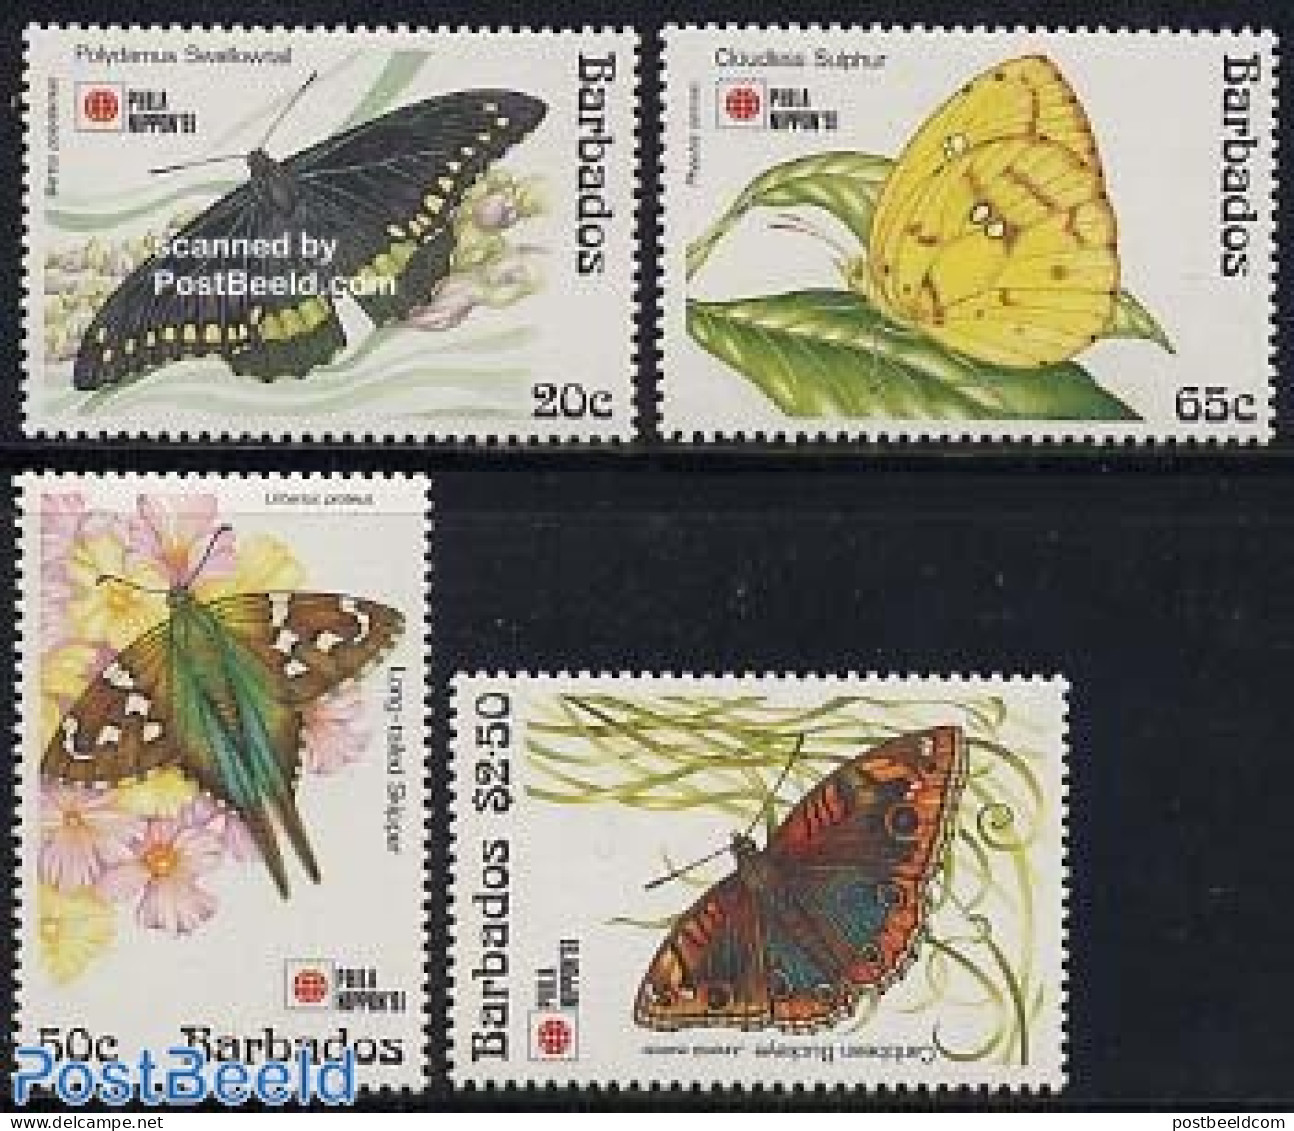 Barbados 1991 Philanippon 4v, Mint NH, Nature - Butterflies - Barbados (1966-...)